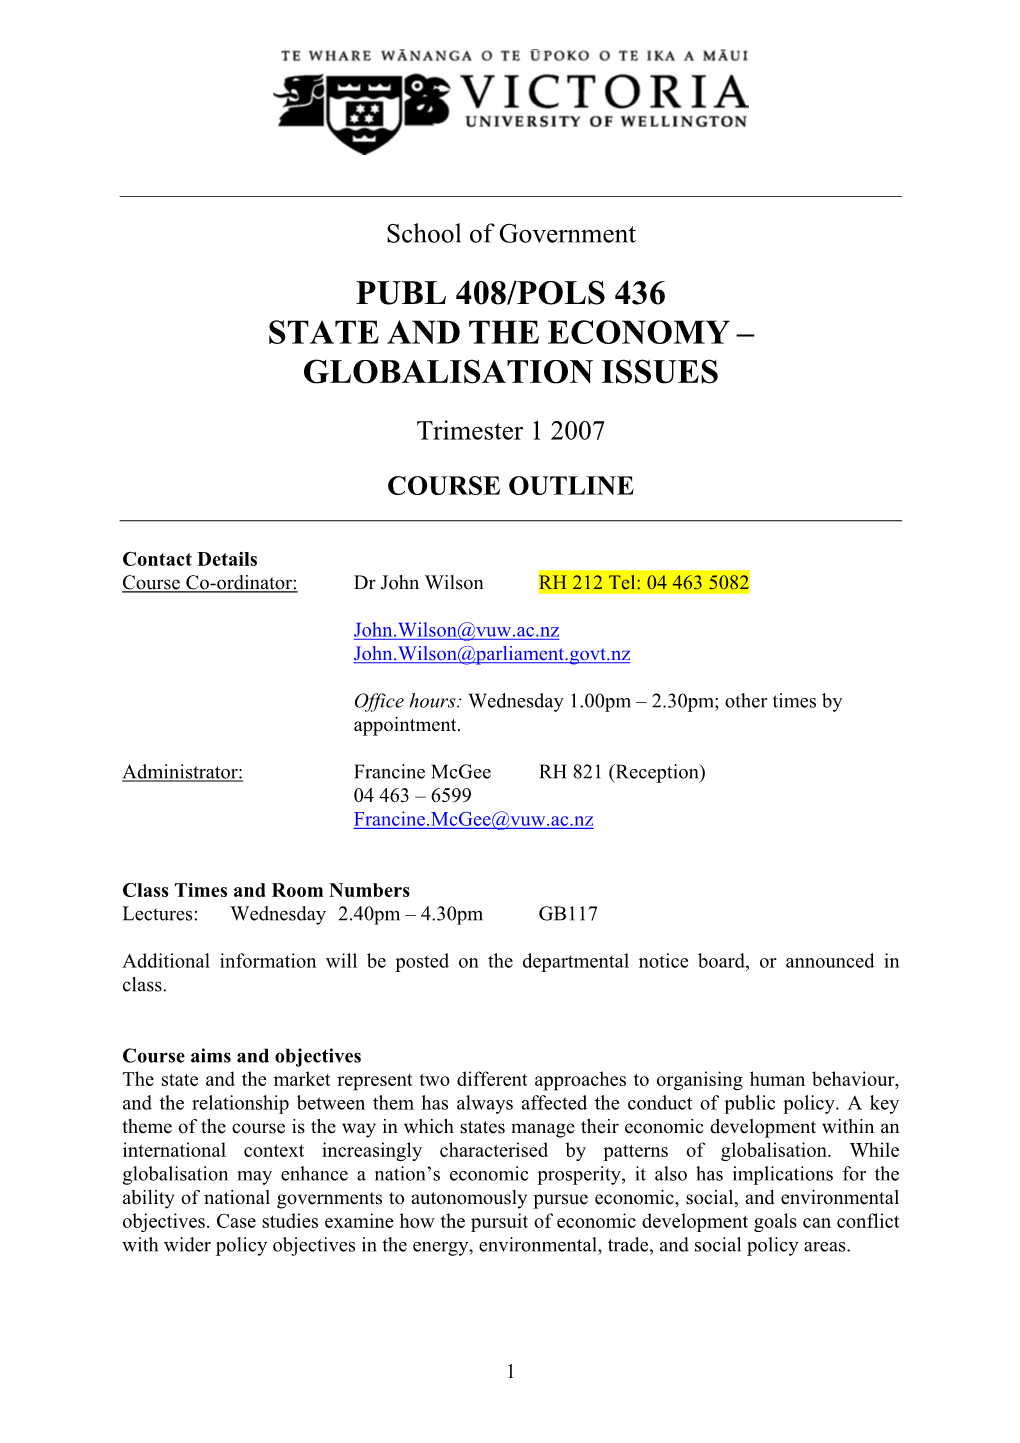 Publ 408/Pols 436 State and the Economy – Globalisation Issues